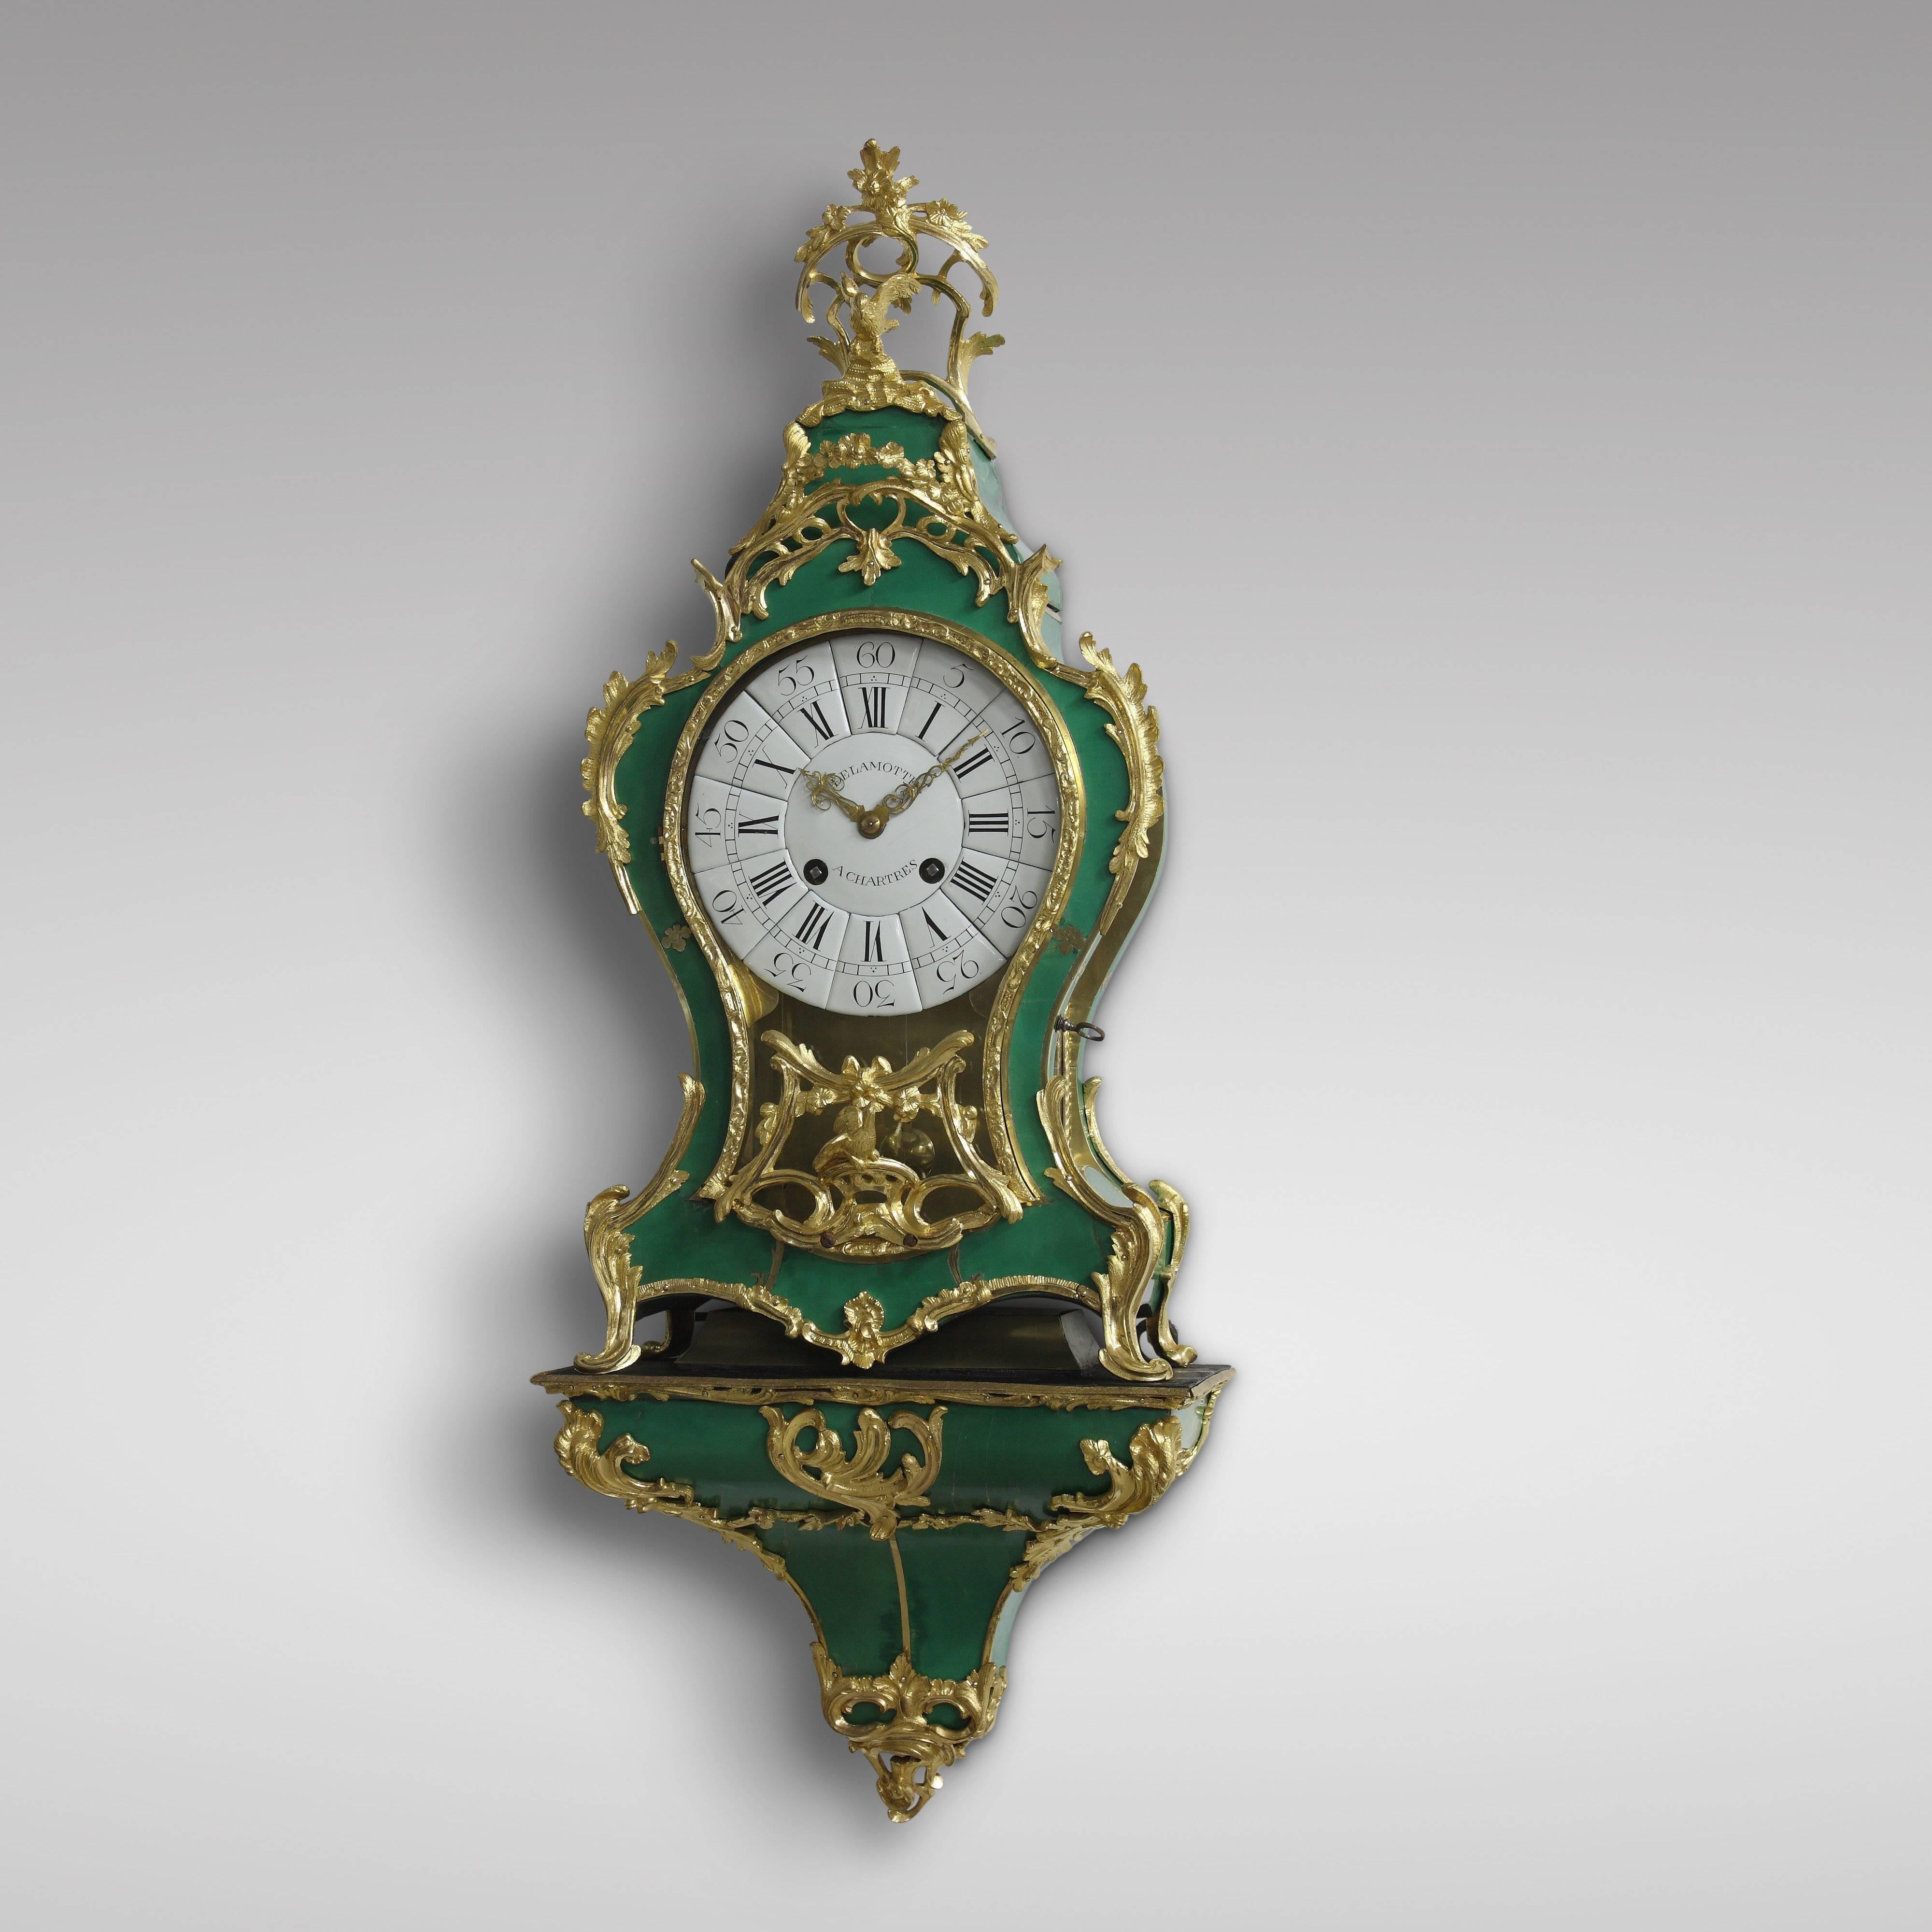 The case with green-backed Horn veneer “Corne Verte” and ormolu bronze applied, signed DELAMOTTE A CHARTRES on the dial and De La Motte A Chartres on the backplate of the movement.
The case and the console with C-scrolls, flowers, leaves and